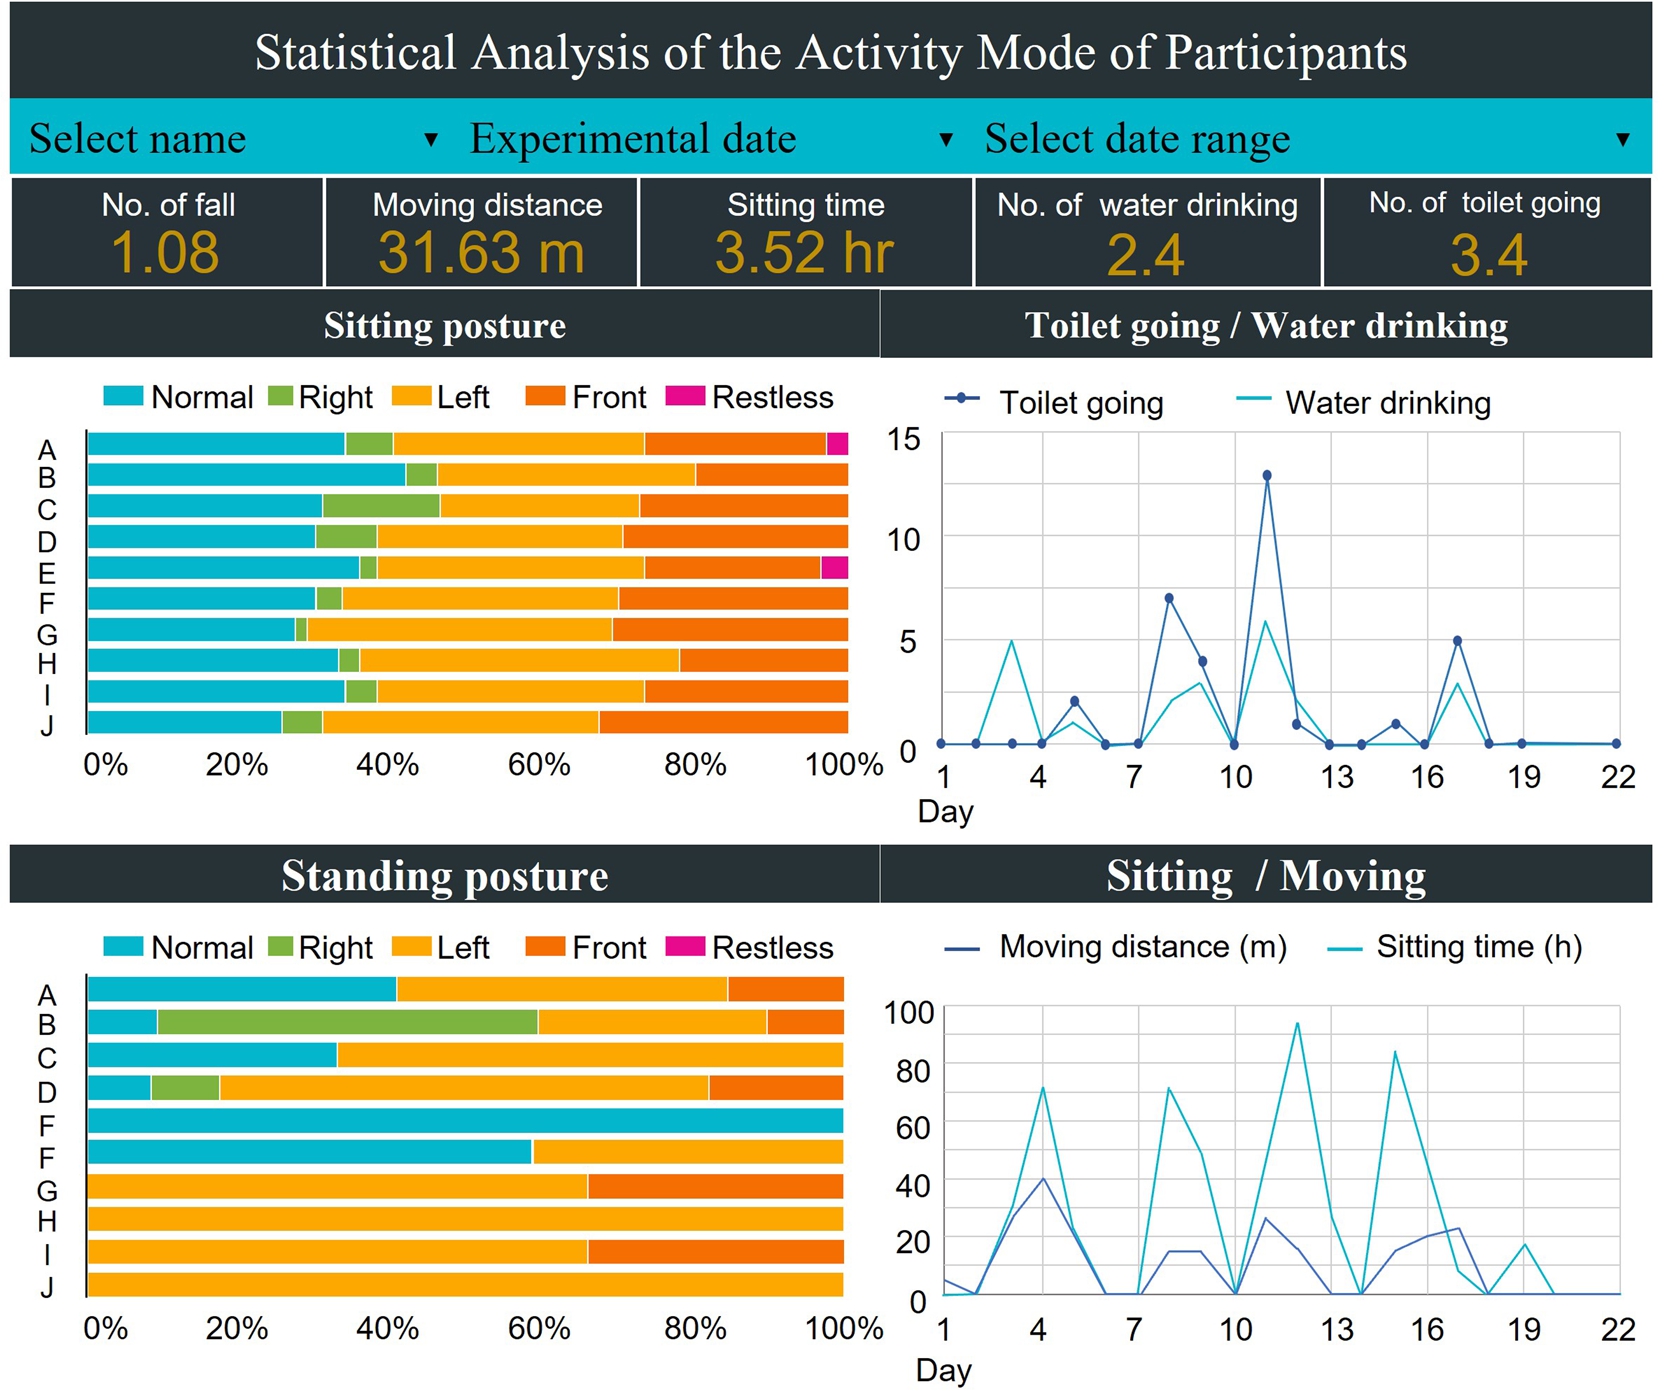 Statistically analytic data of the activity mode.